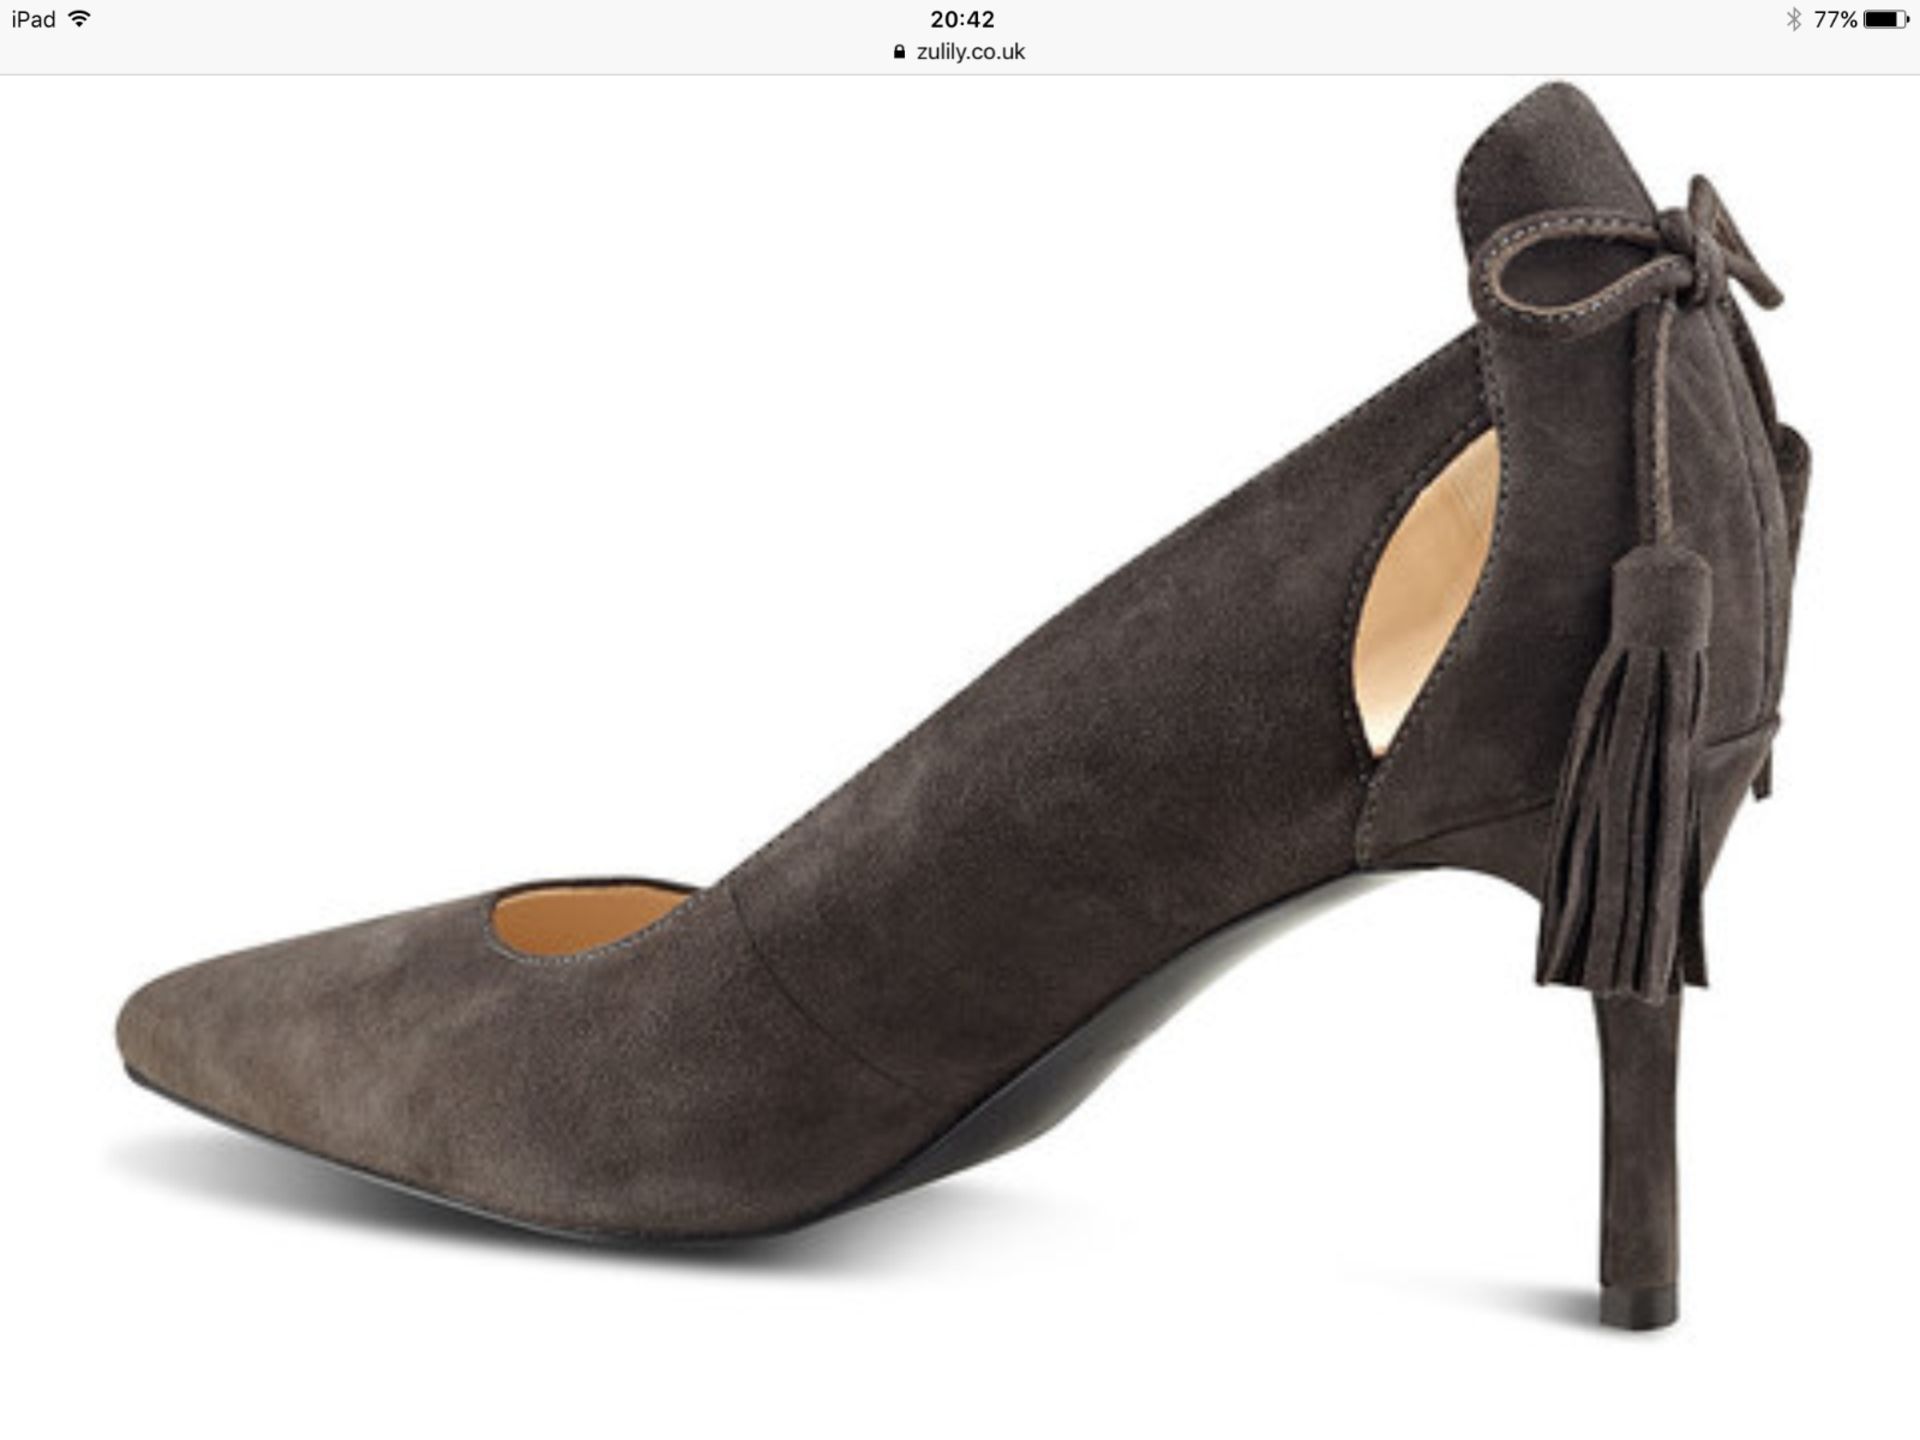 Nine West Dark Grey Modesty Suede Shoe, Size Eur 38 (New with box) [Ref: D-003] - Image 2 of 6